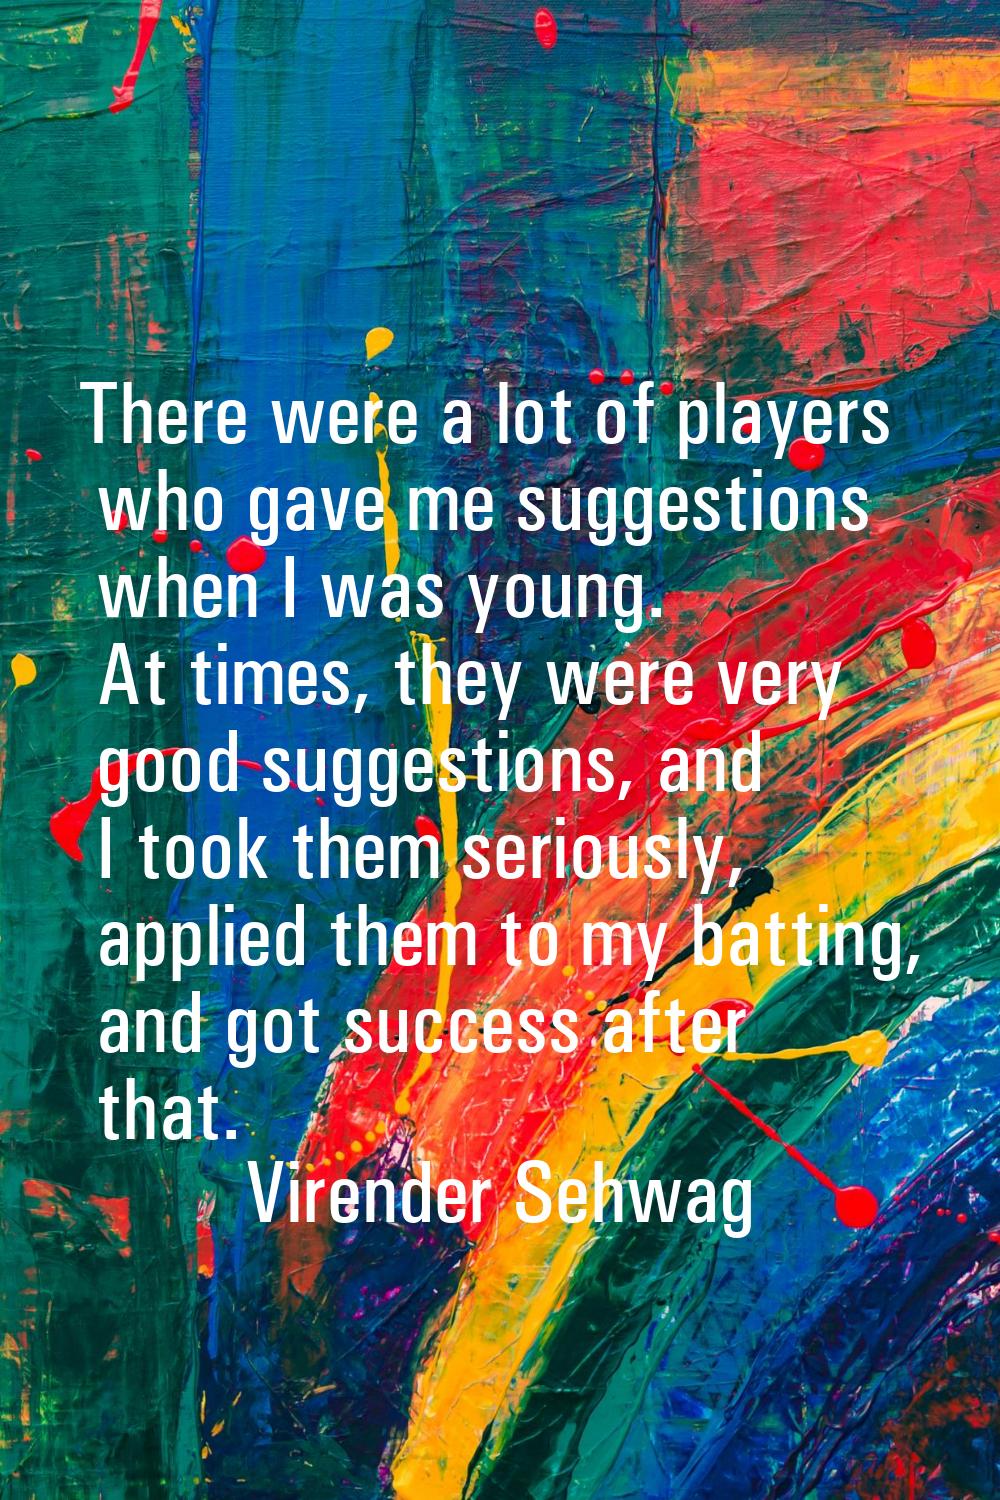 There were a lot of players who gave me suggestions when I was young. At times, they were very good